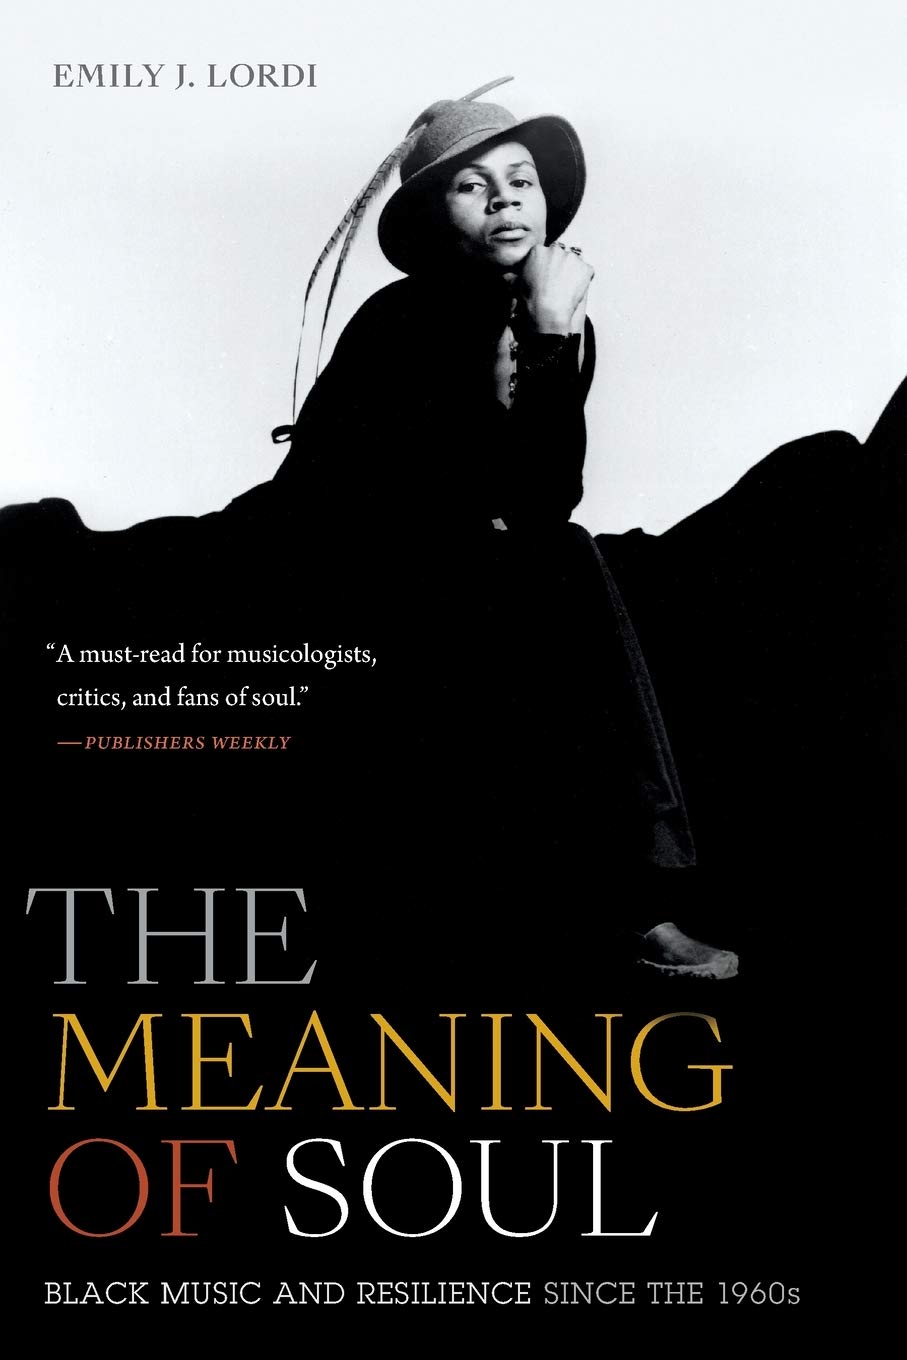 The cover of The Meaning of Soul: Black Music and Resilience since the 1960s